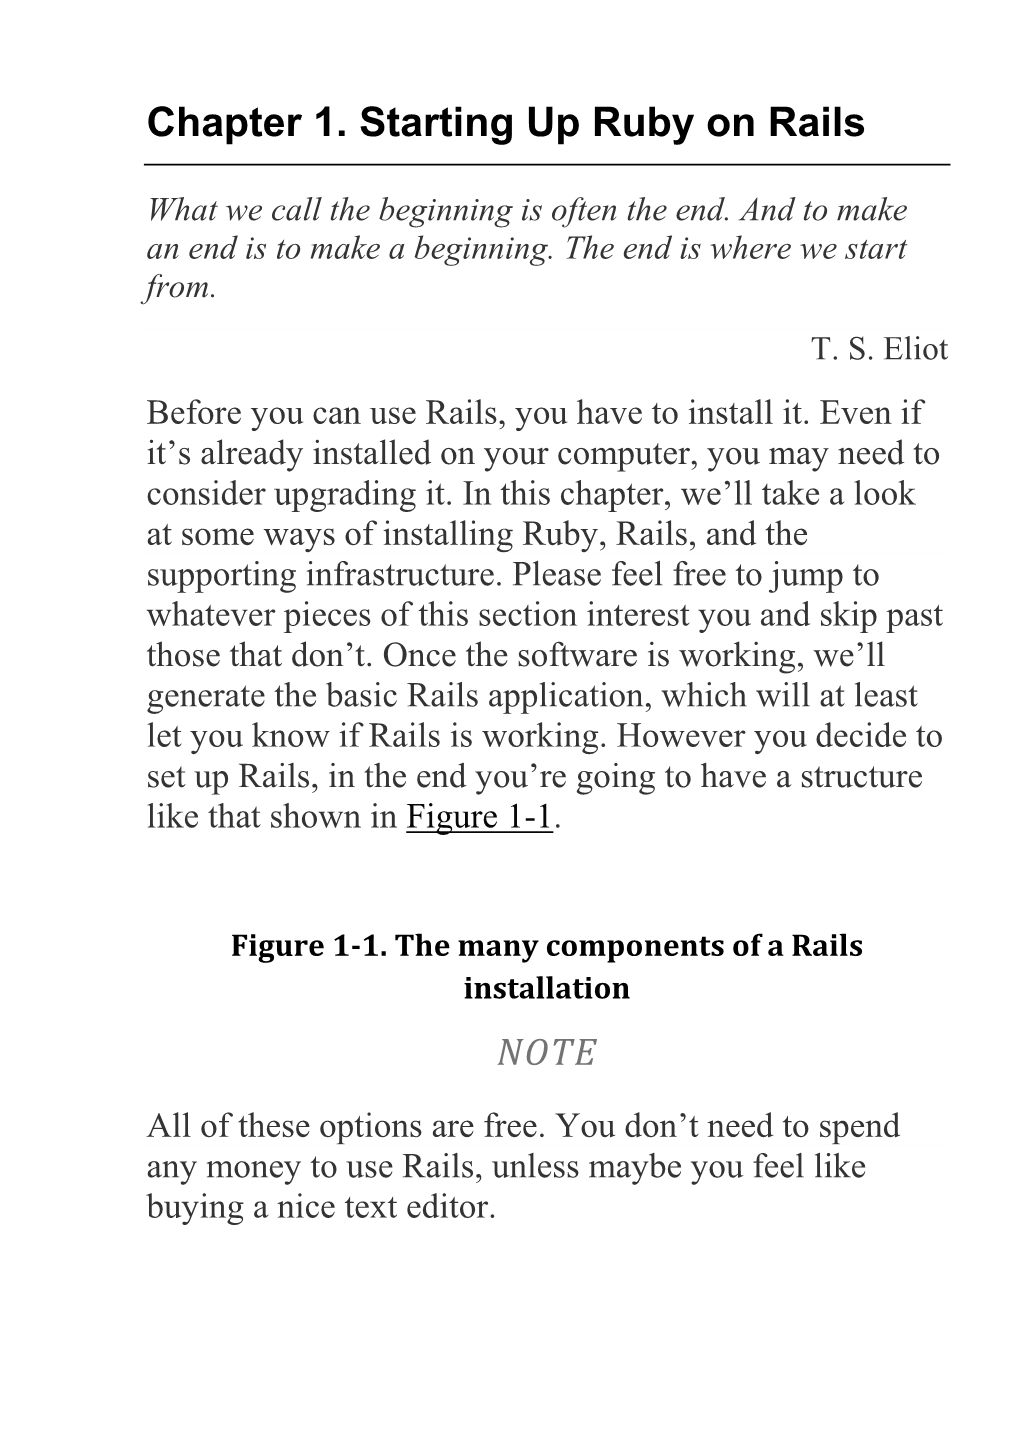 Chapter 1. Starting up Ruby on Rails